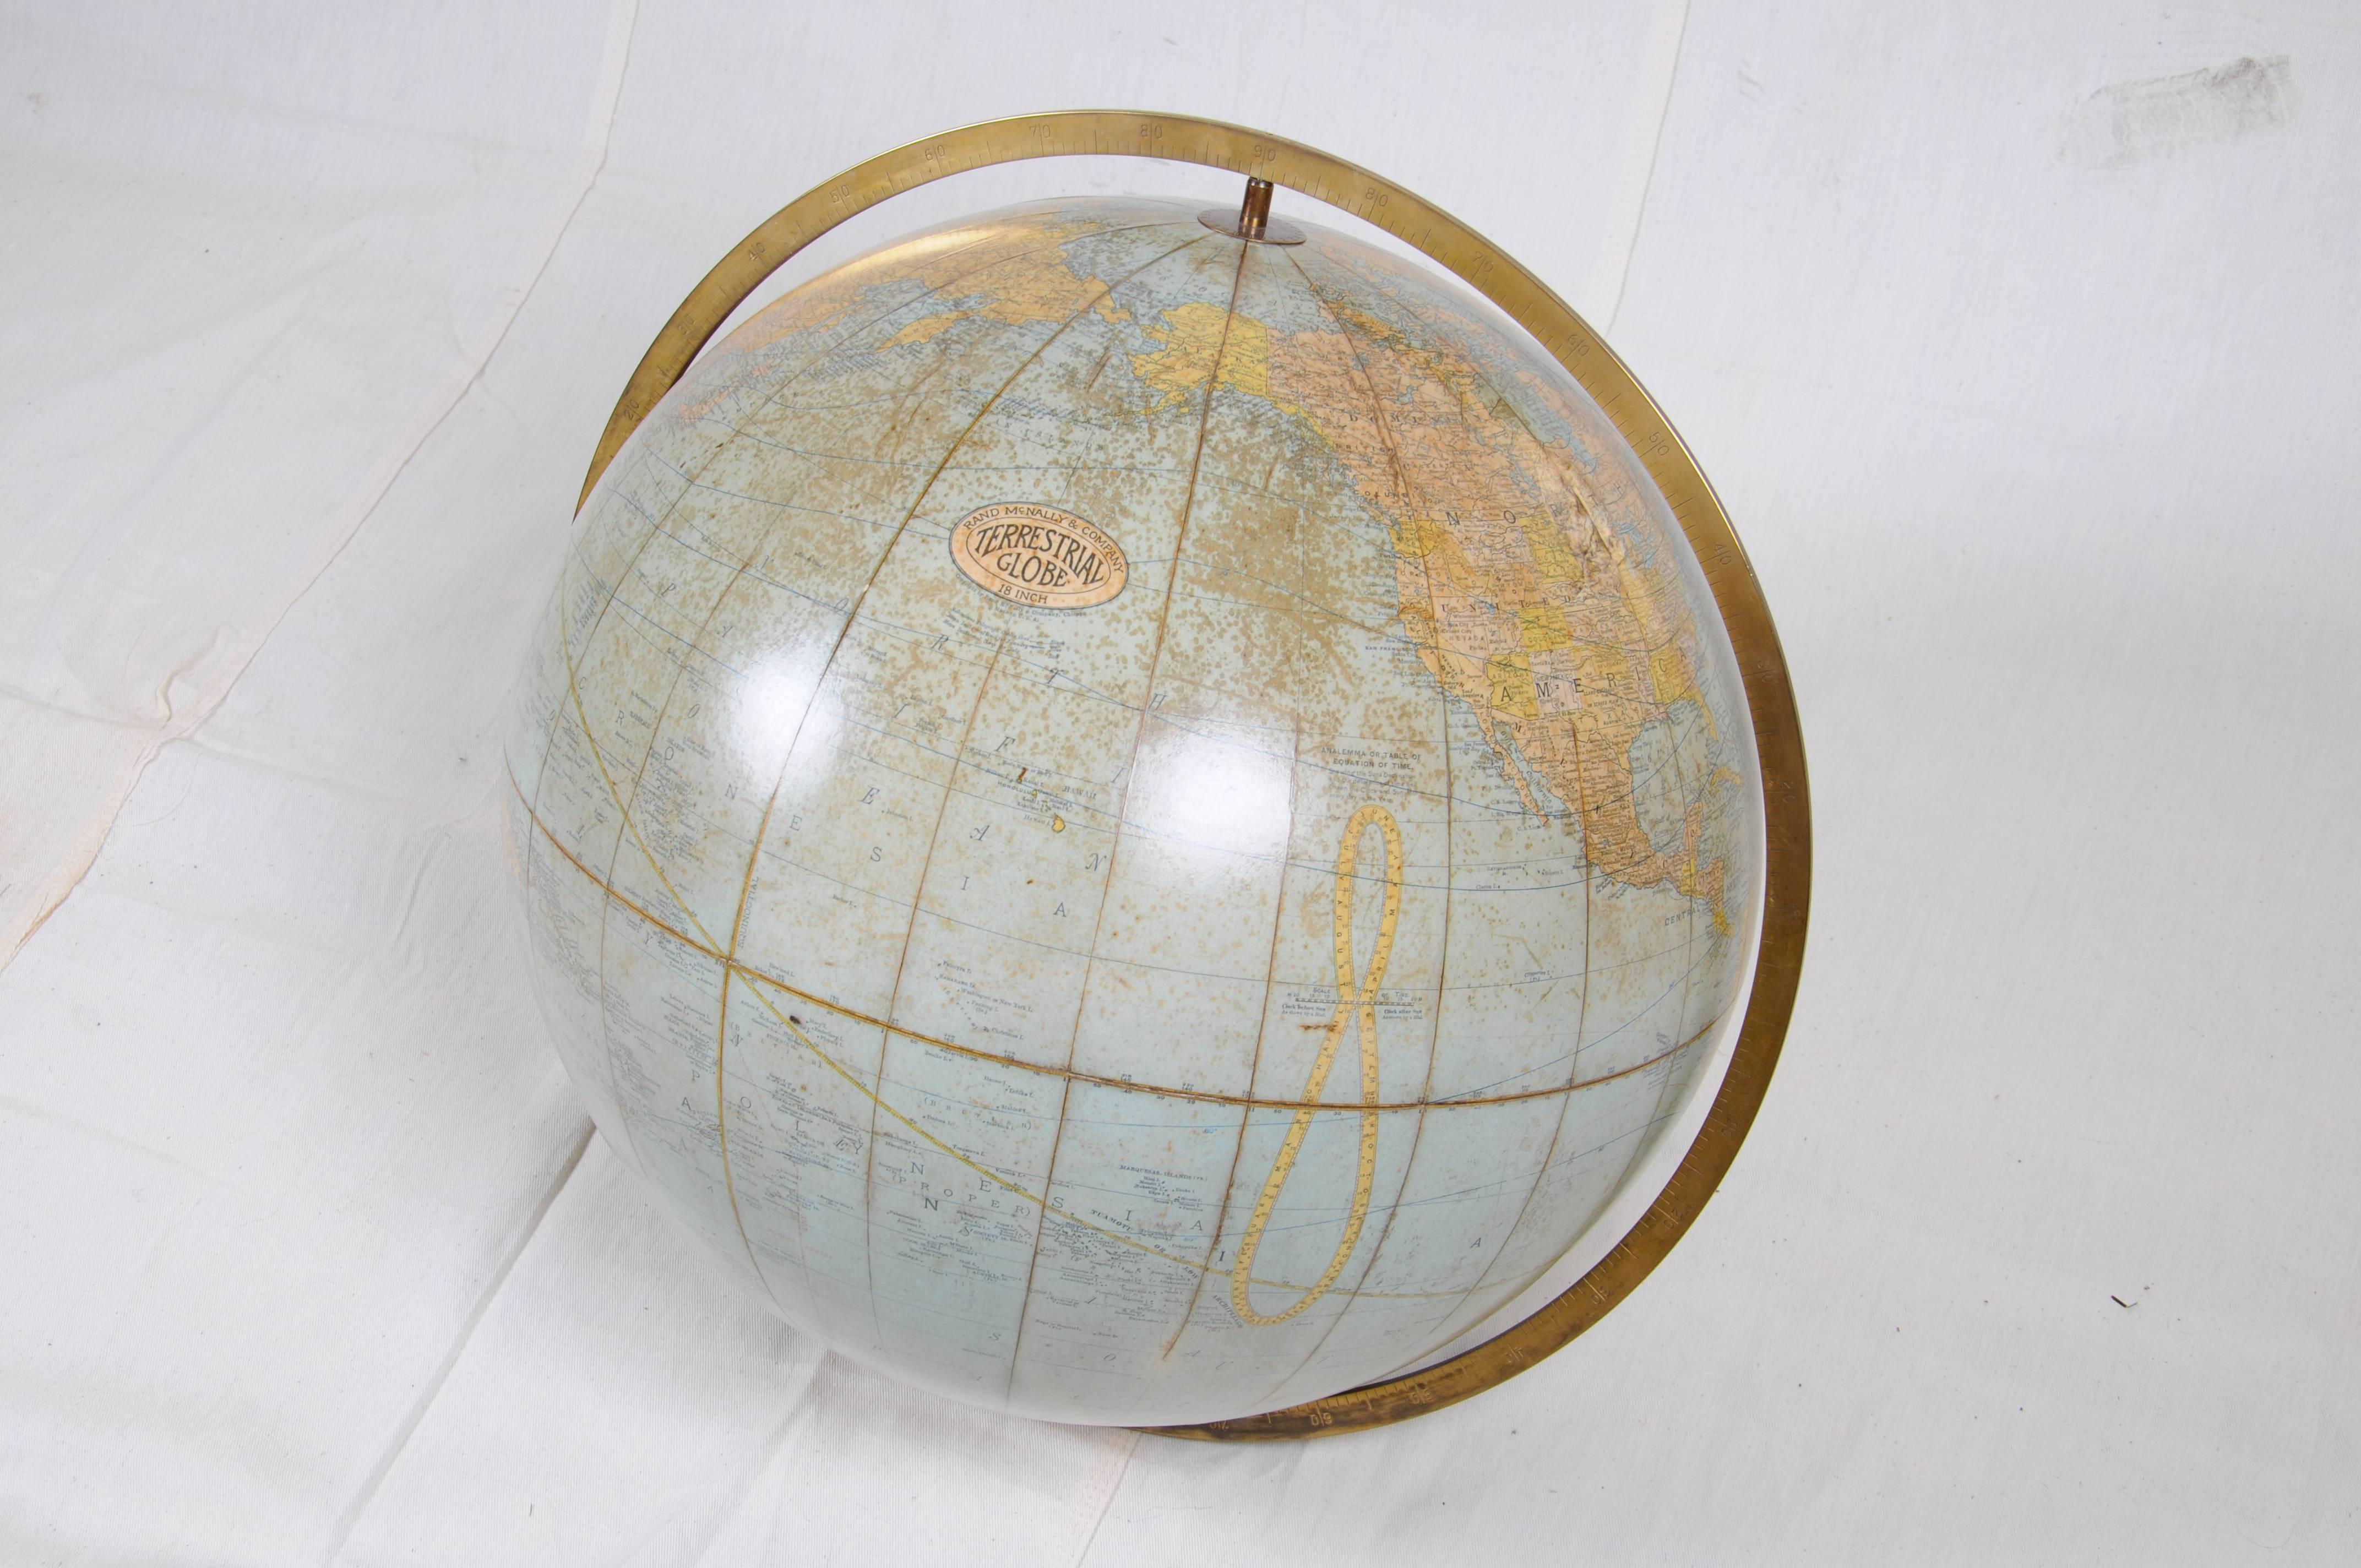 Rand McNally & Company
18-inch terrestrial floor globe
Chicago: circa 1924
Mahogany Jacobean style stand
Measures: 39.5 inches high
22 inches diameter, overall 

Condition: Globe and horizon generally very good with the usual toning, wear,